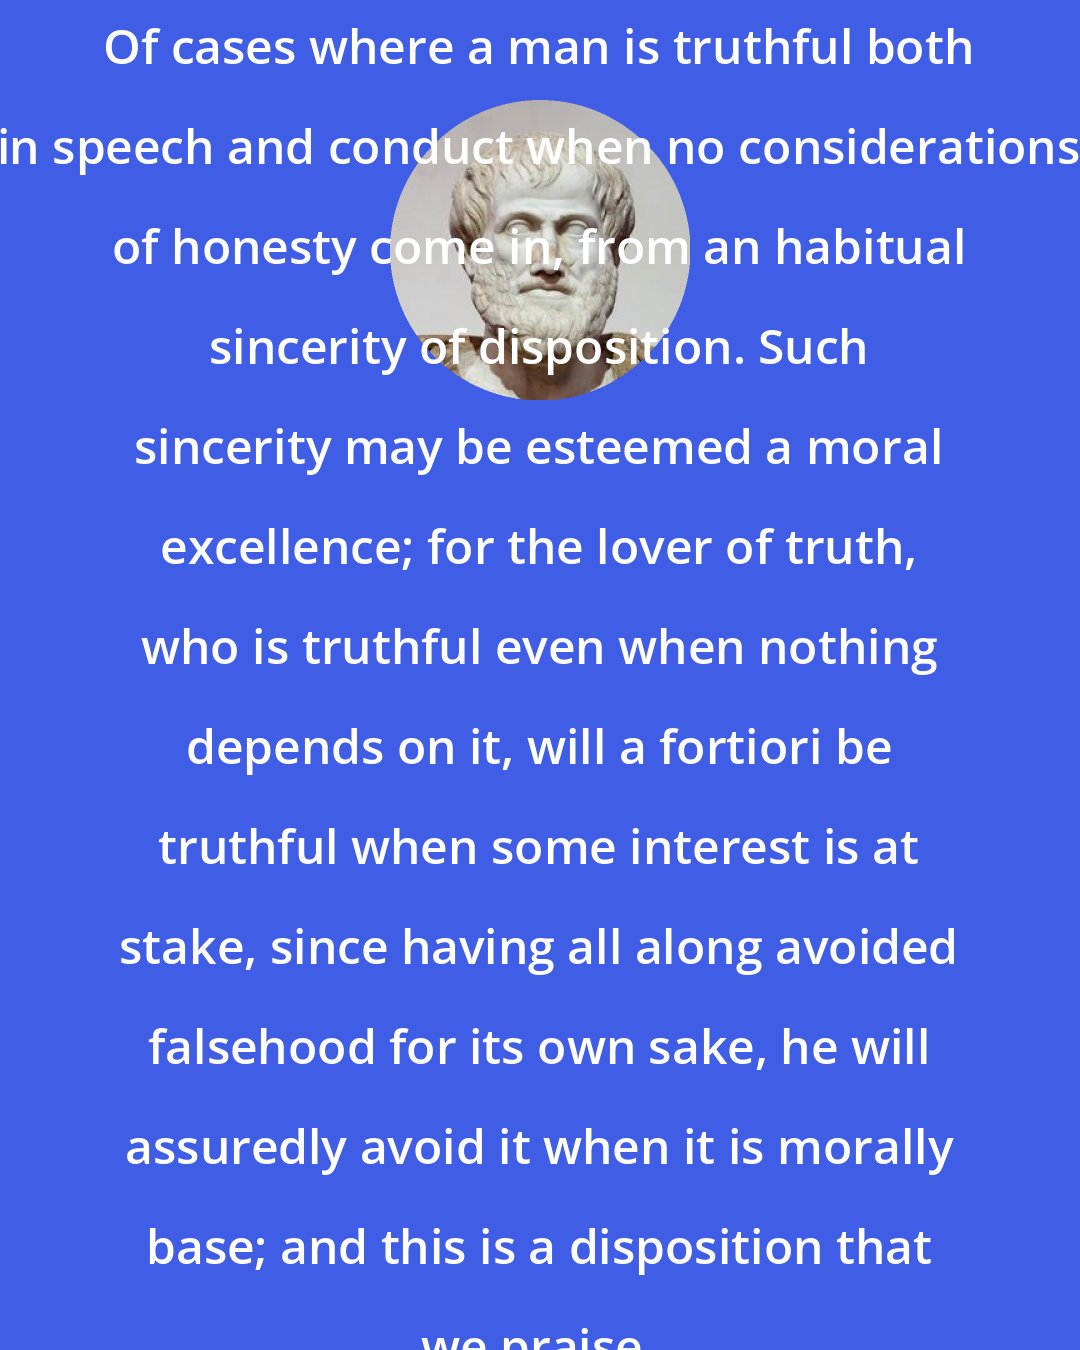 Aristotle: Of cases where a man is truthful both in speech and conduct when no considerations of honesty come in, from an habitual sincerity of disposition. Such sincerity may be esteemed a moral excellence; for the lover of truth, who is truthful even when nothing depends on it, will a fortiori be truthful when some interest is at stake, since having all along avoided falsehood for its own sake, he will assuredly avoid it when it is morally base; and this is a disposition that we praise.